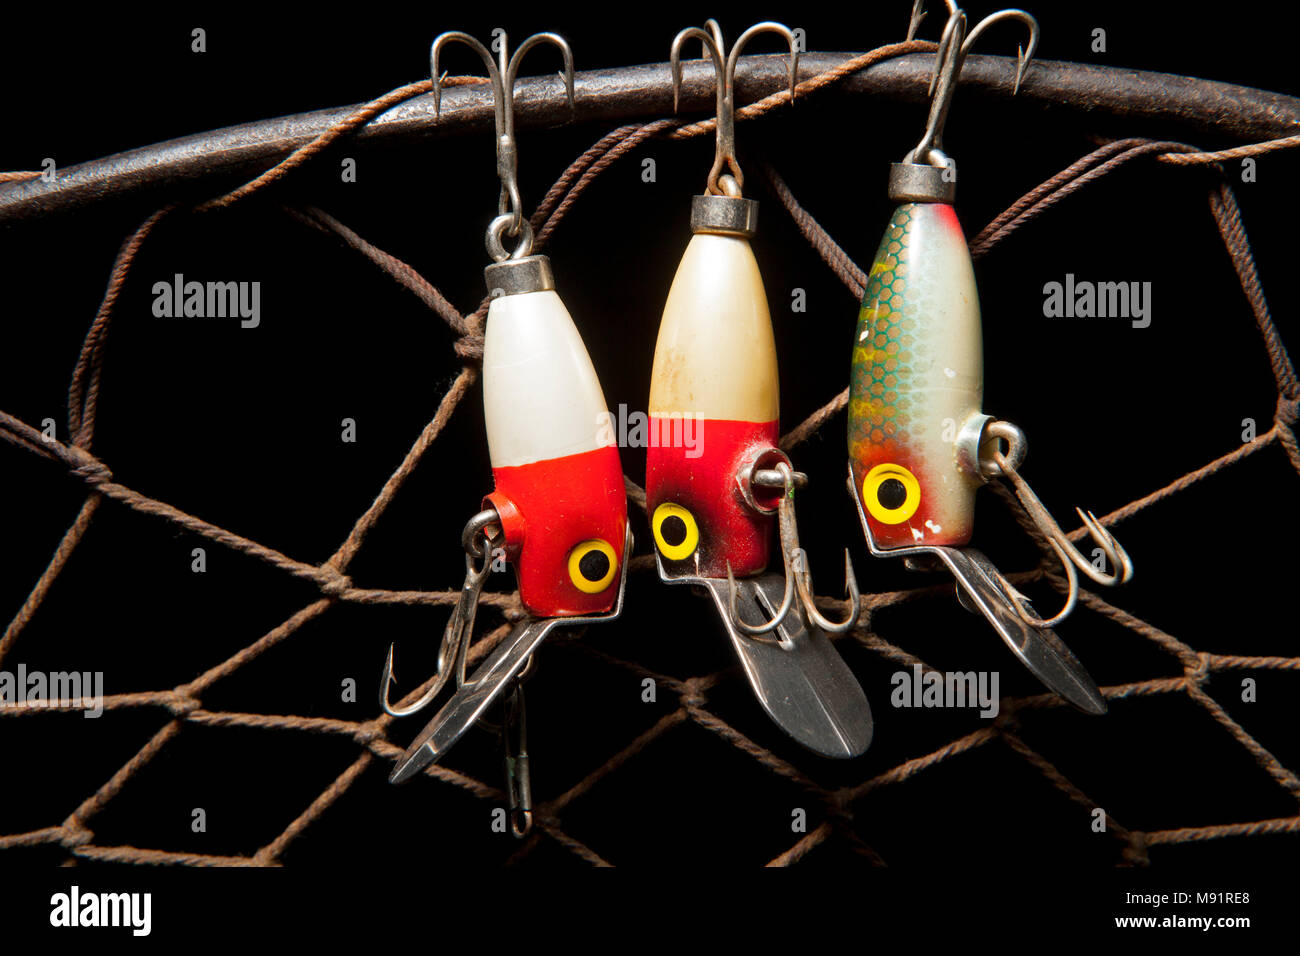 Antique Fishing Lures are Valuable To Collectors Stock Photo - Image of  snare, wooden: 225452218, valuable antique fishing lures 